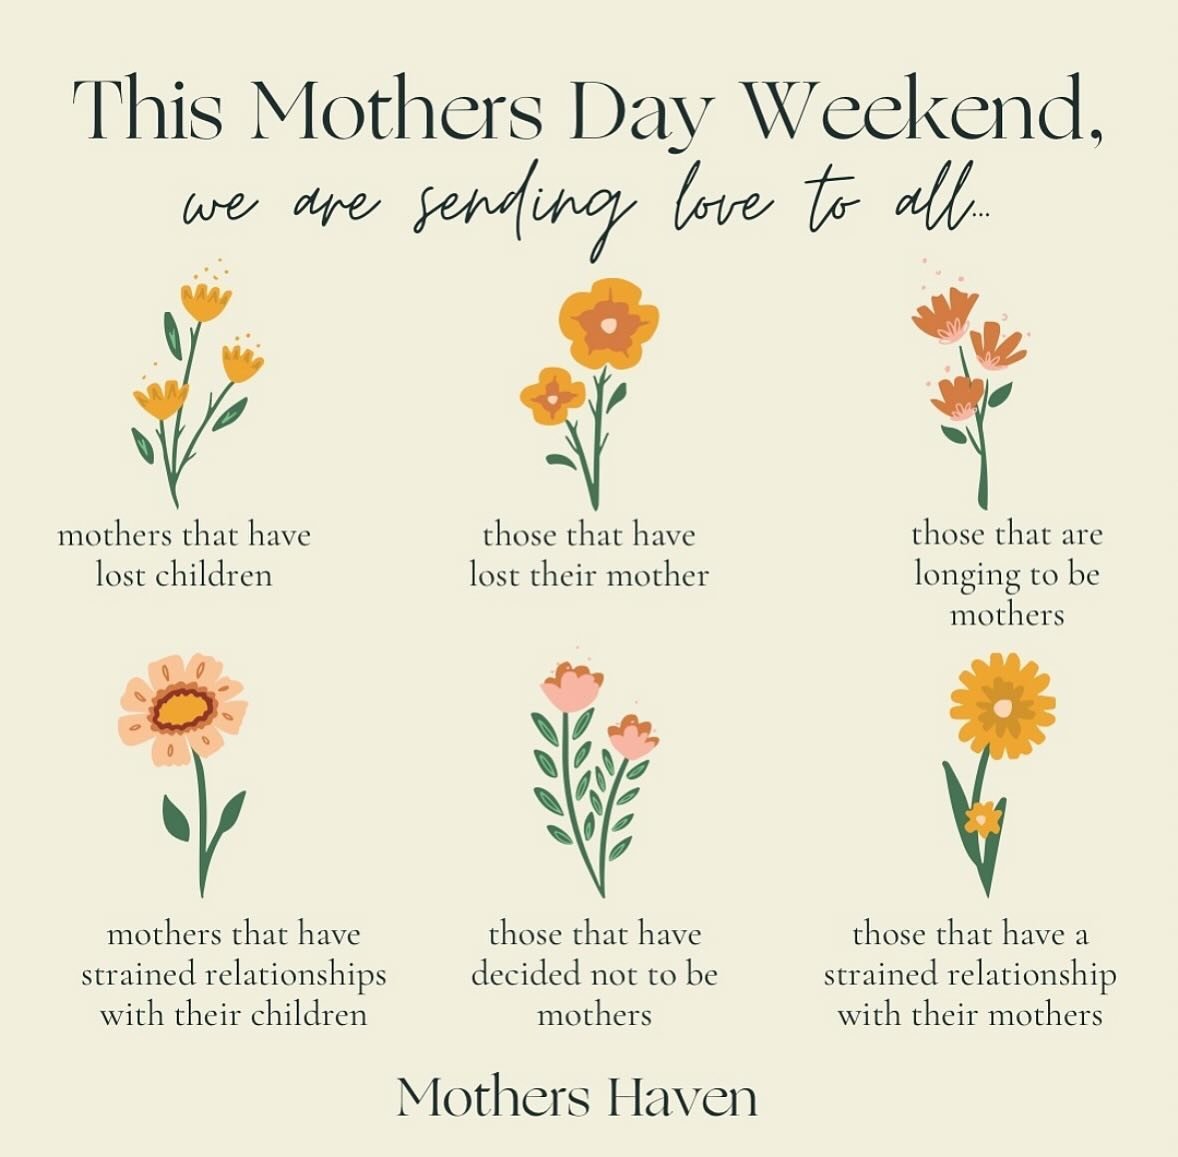 Thank you for the beautiful reminder, @mothers_haven_ 🕊️

🌸May the difficult emotions and physical pain of all beings be heard and held with compassion. 

🌸May the pain and suffering of all beings be met with compassion, wisdom and courage. 

🌸Ma